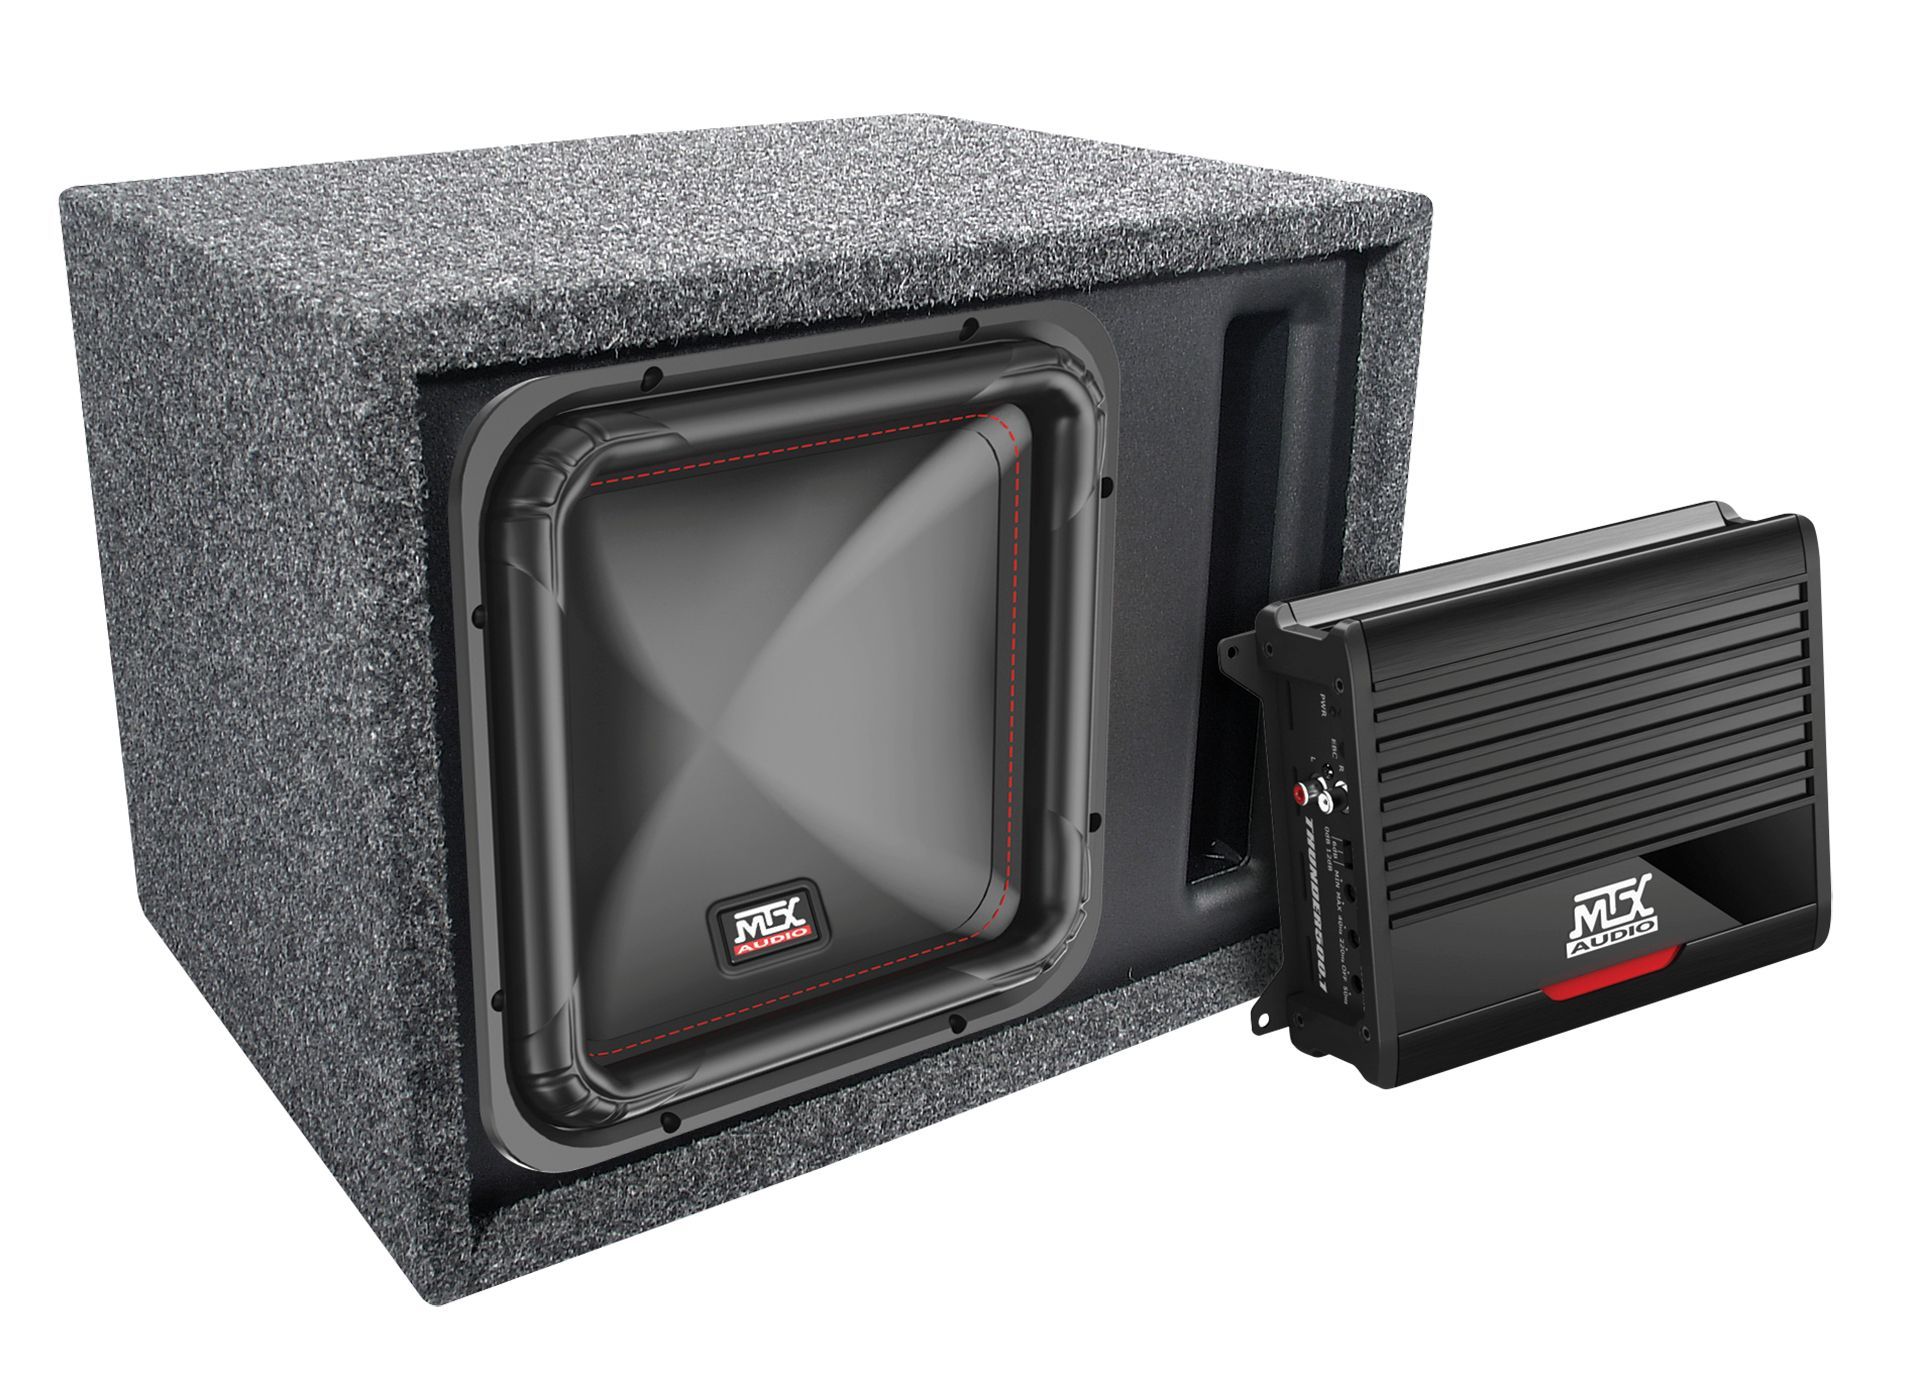 S6512-44, THUNDER500.1, and Enclosure Bass | MTX Audio - Serious About